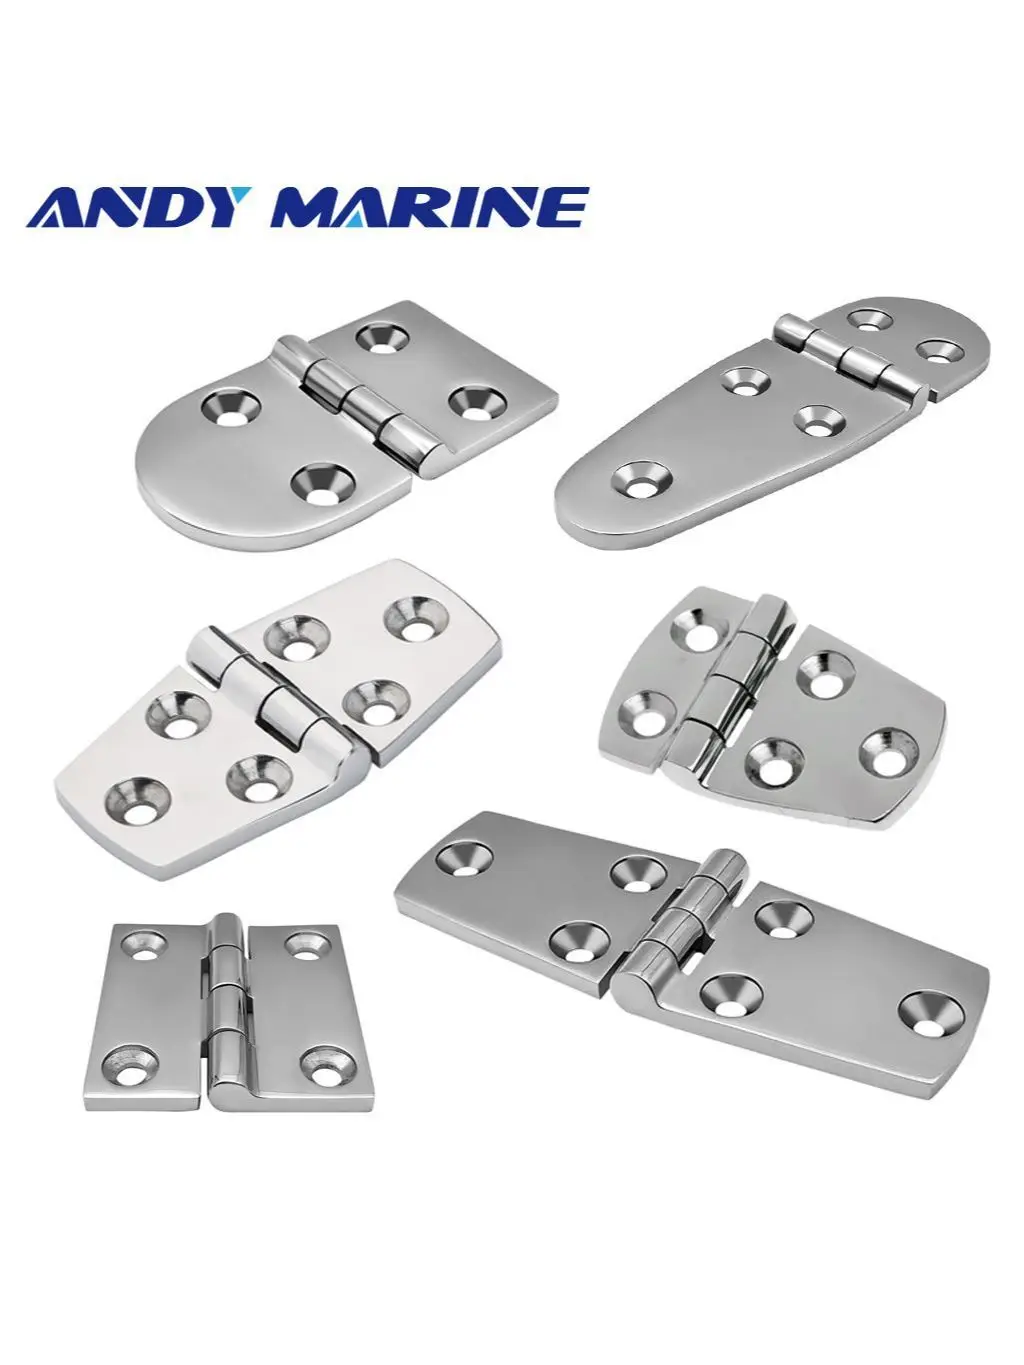 Andymarine Heavy Stainless Steel Casting Hinge Flat Hinge Cabinet Doors For Windows Hinge Wooden Box Hinge Thickness 2pcs 2 inch 2 5 inch 3 inch stainless steel flat hinge cabinet doors windows wooden furniture box hinges